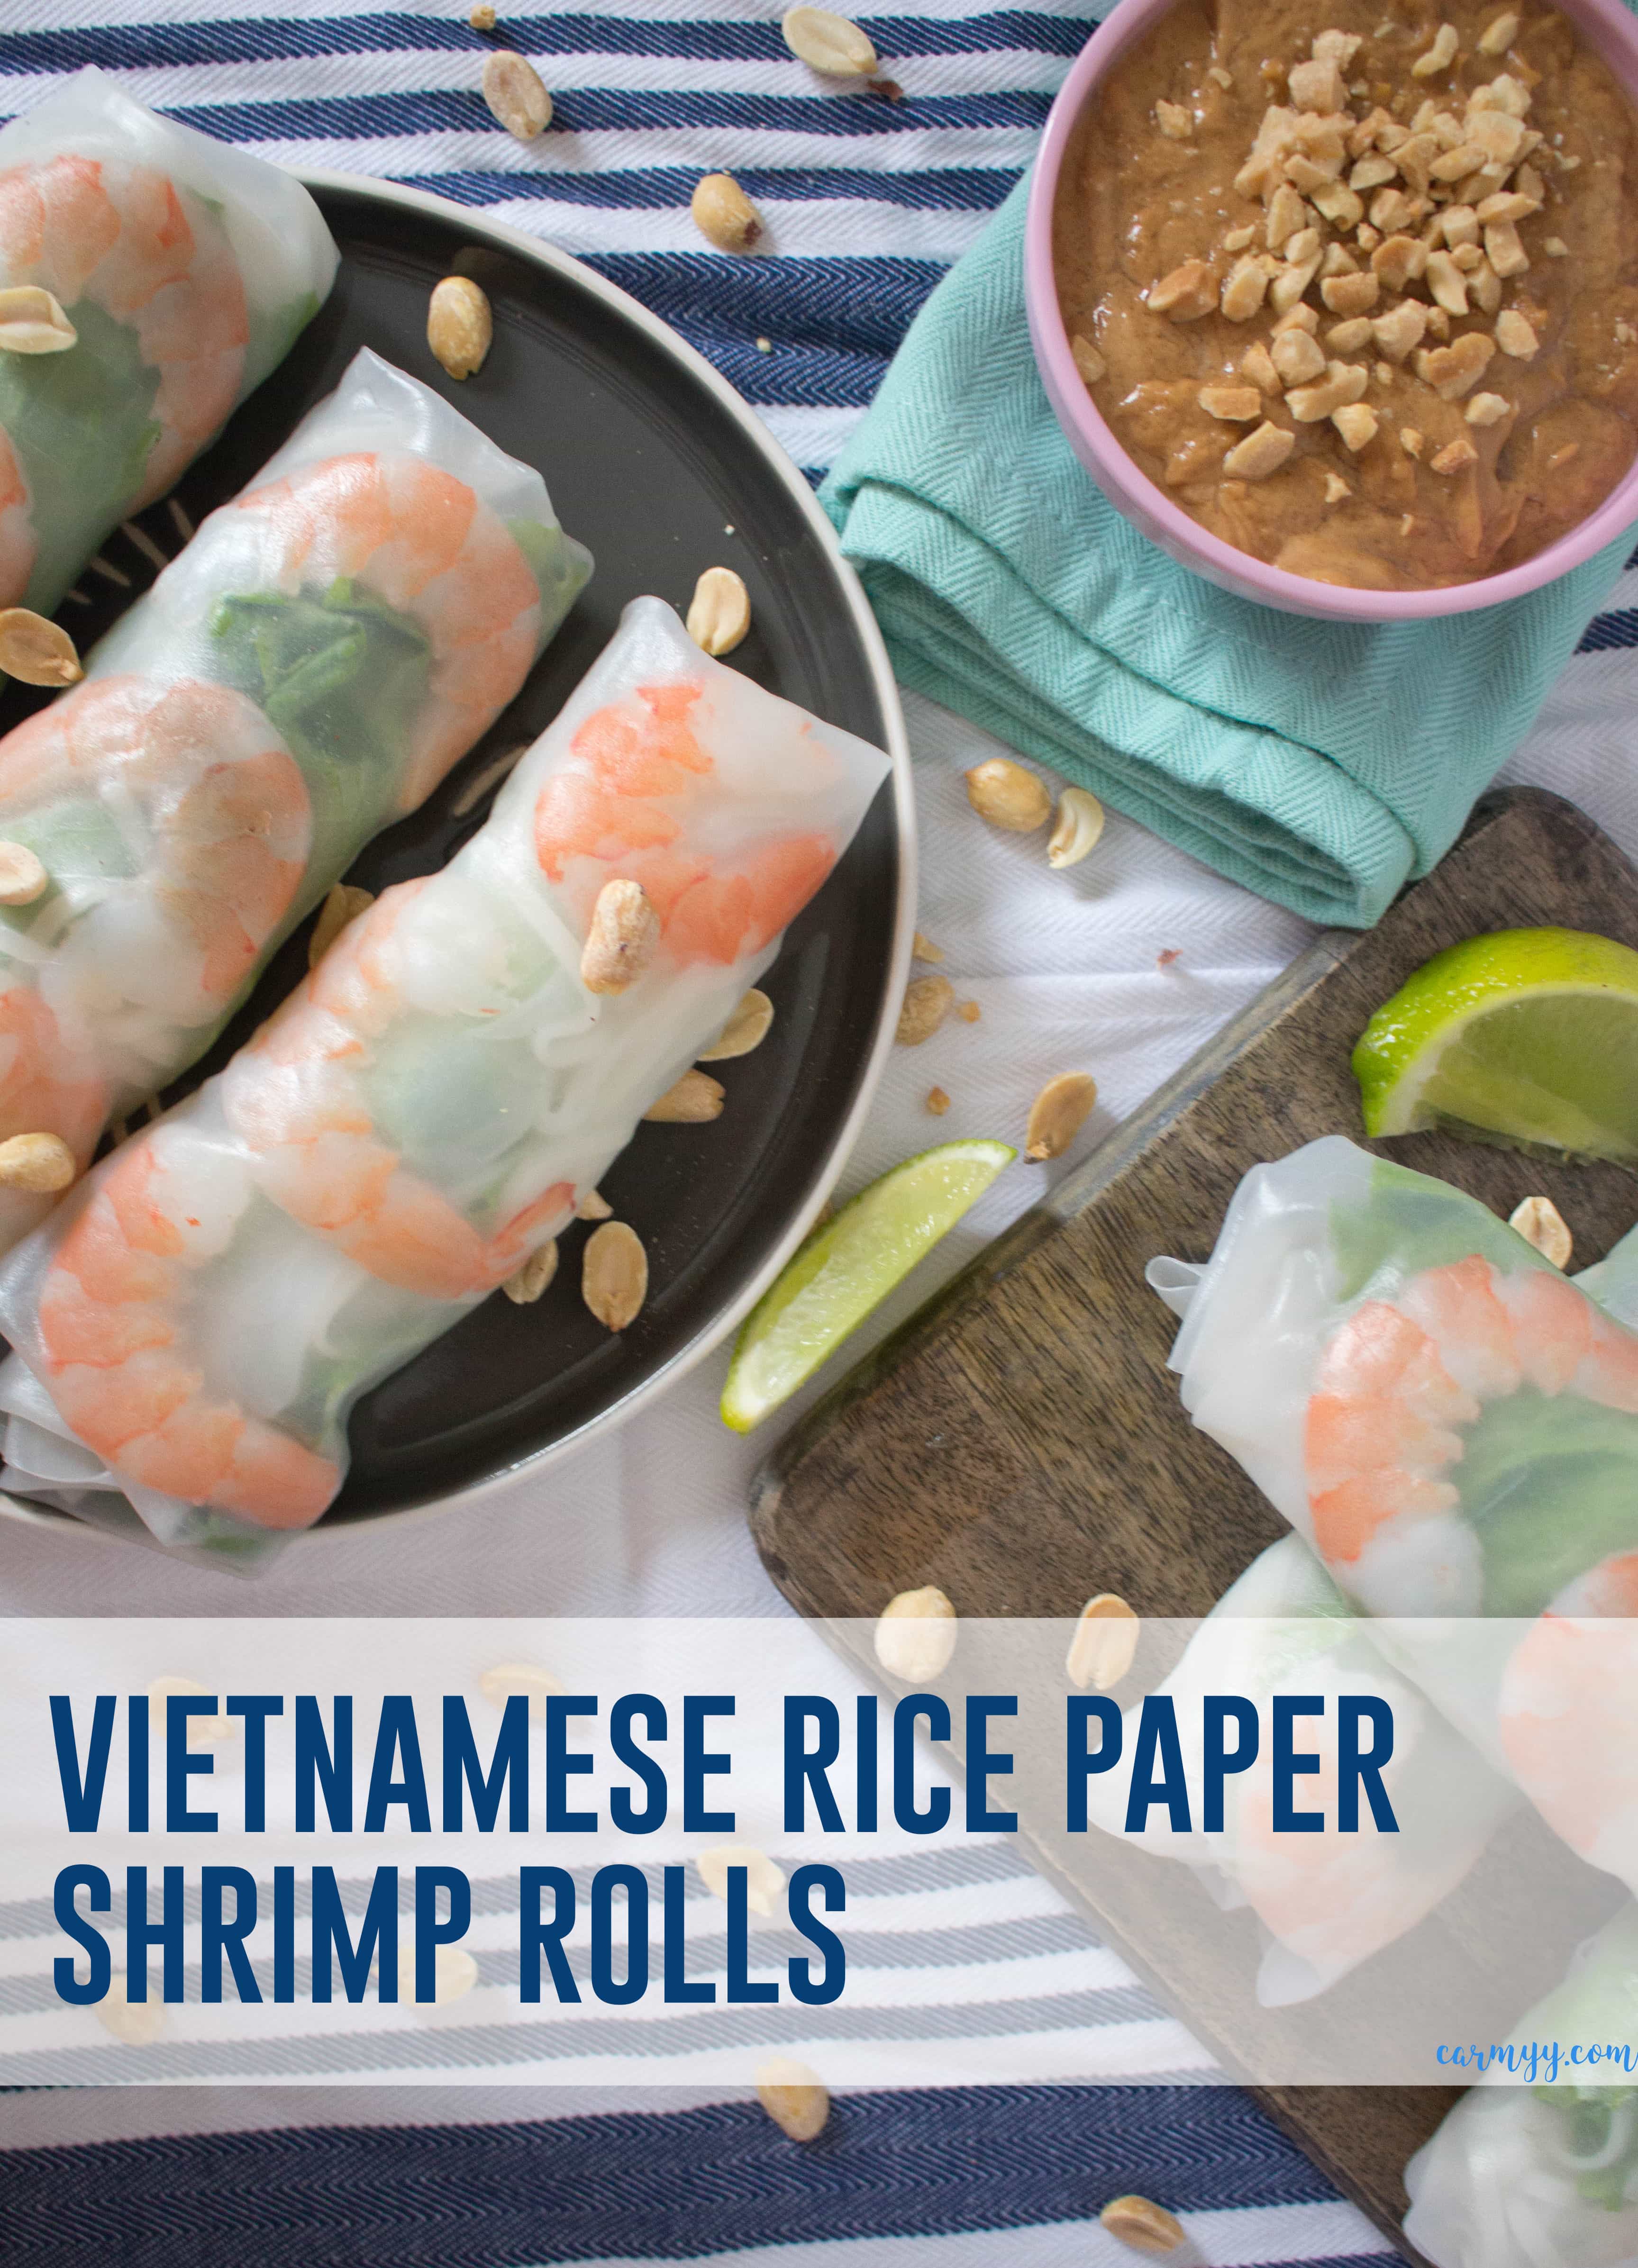 These fresh and healthy Vietnamese Rice Paper Shrimp Rolls are so easy to make! They're accompanied by my go-to creamy peanut sauce.